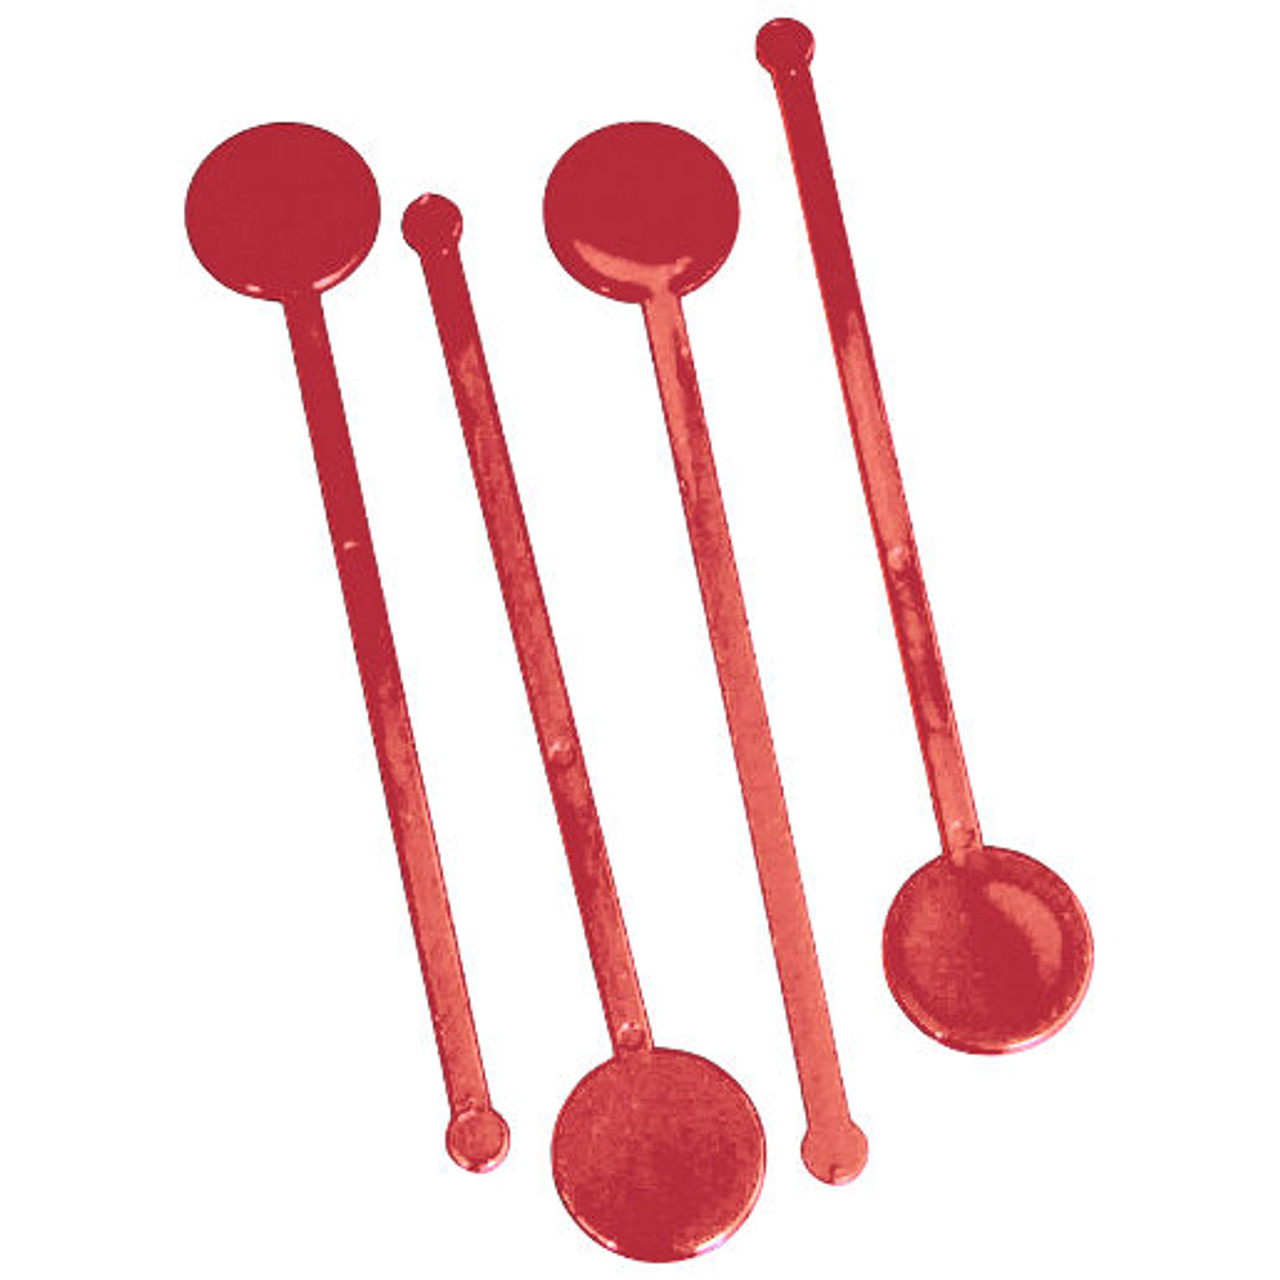 https://cdn11.bigcommerce.com/s-tjx0gy7pkp/images/stencil/1280x1280/products/14591/28372/Cocktail_Disc_drinks_stirrer_swizzel_sticks_red__31016.1655013196.jpg?c=2